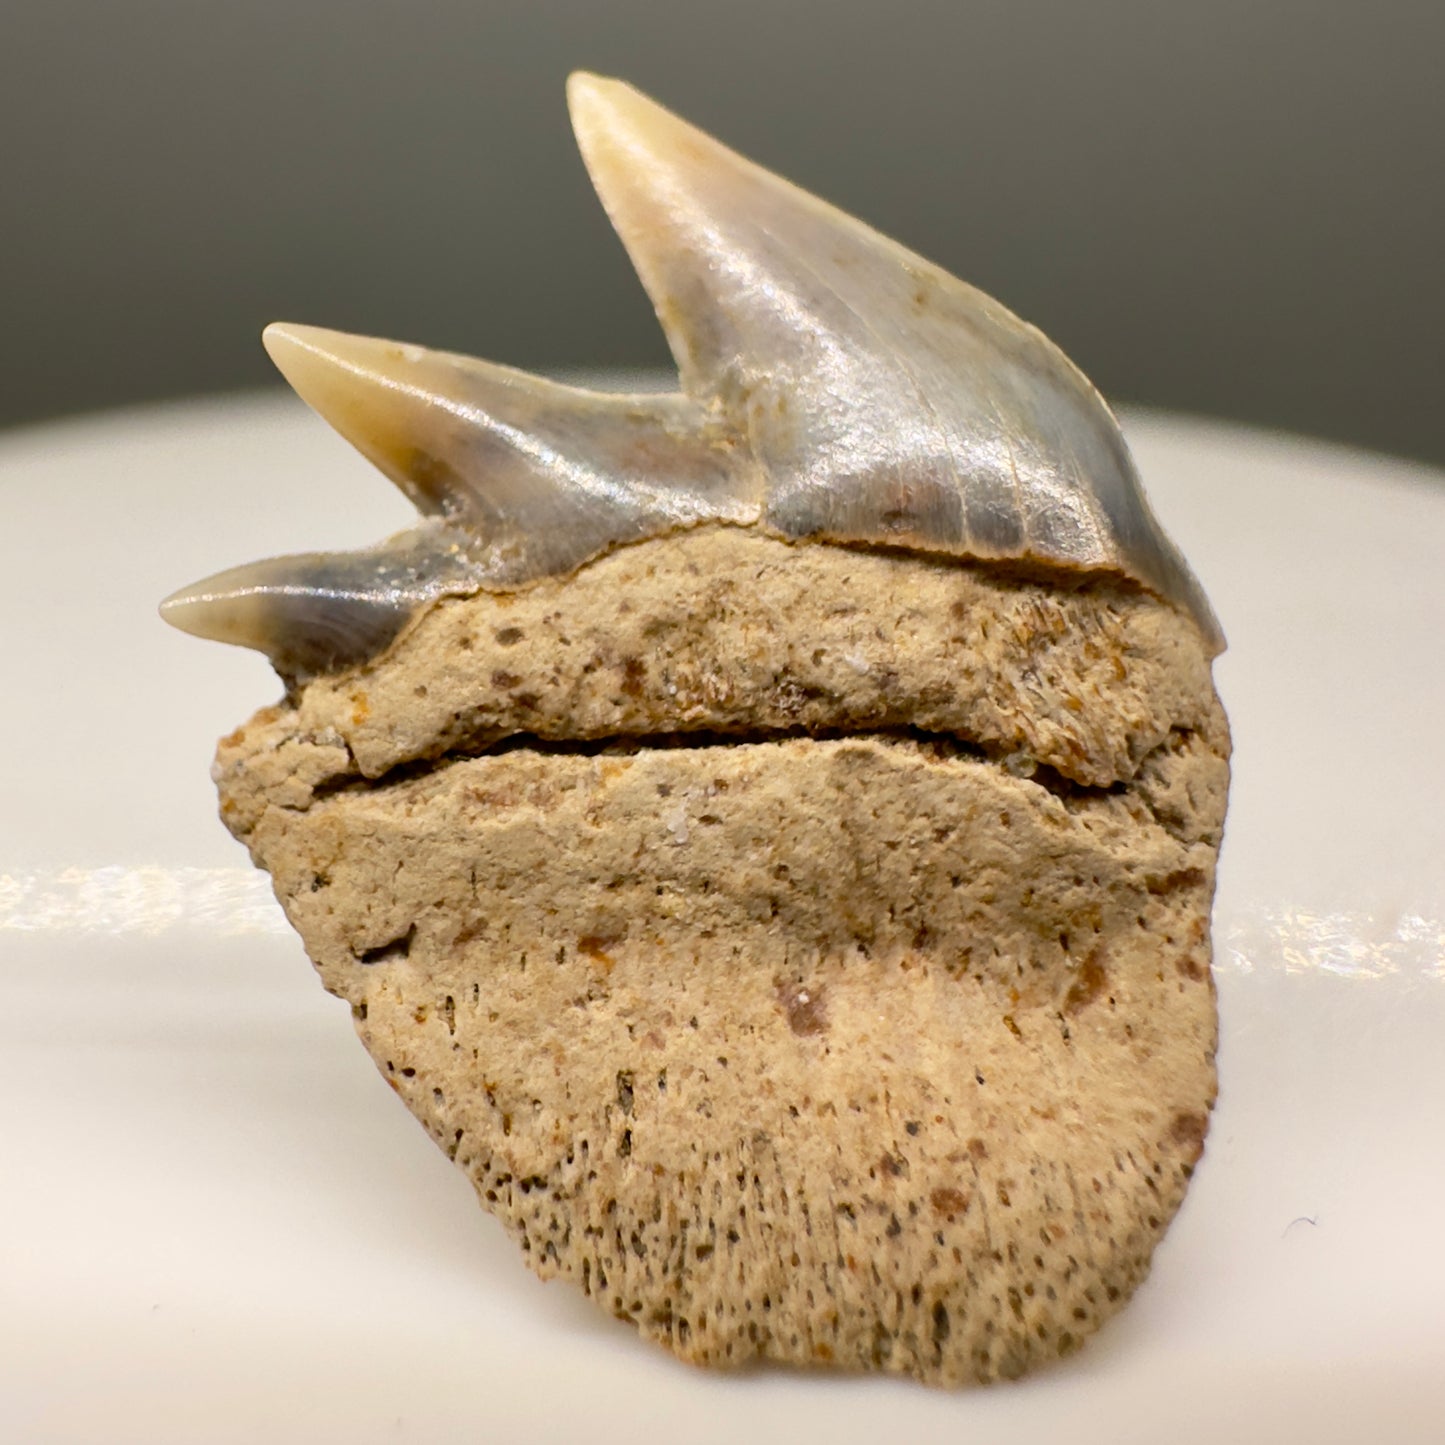 Rare Upper 0.78" long Fossil Hexanchus gigas - Sixgill Cow Shark tooth from Sacaco, Peru R526 - Back